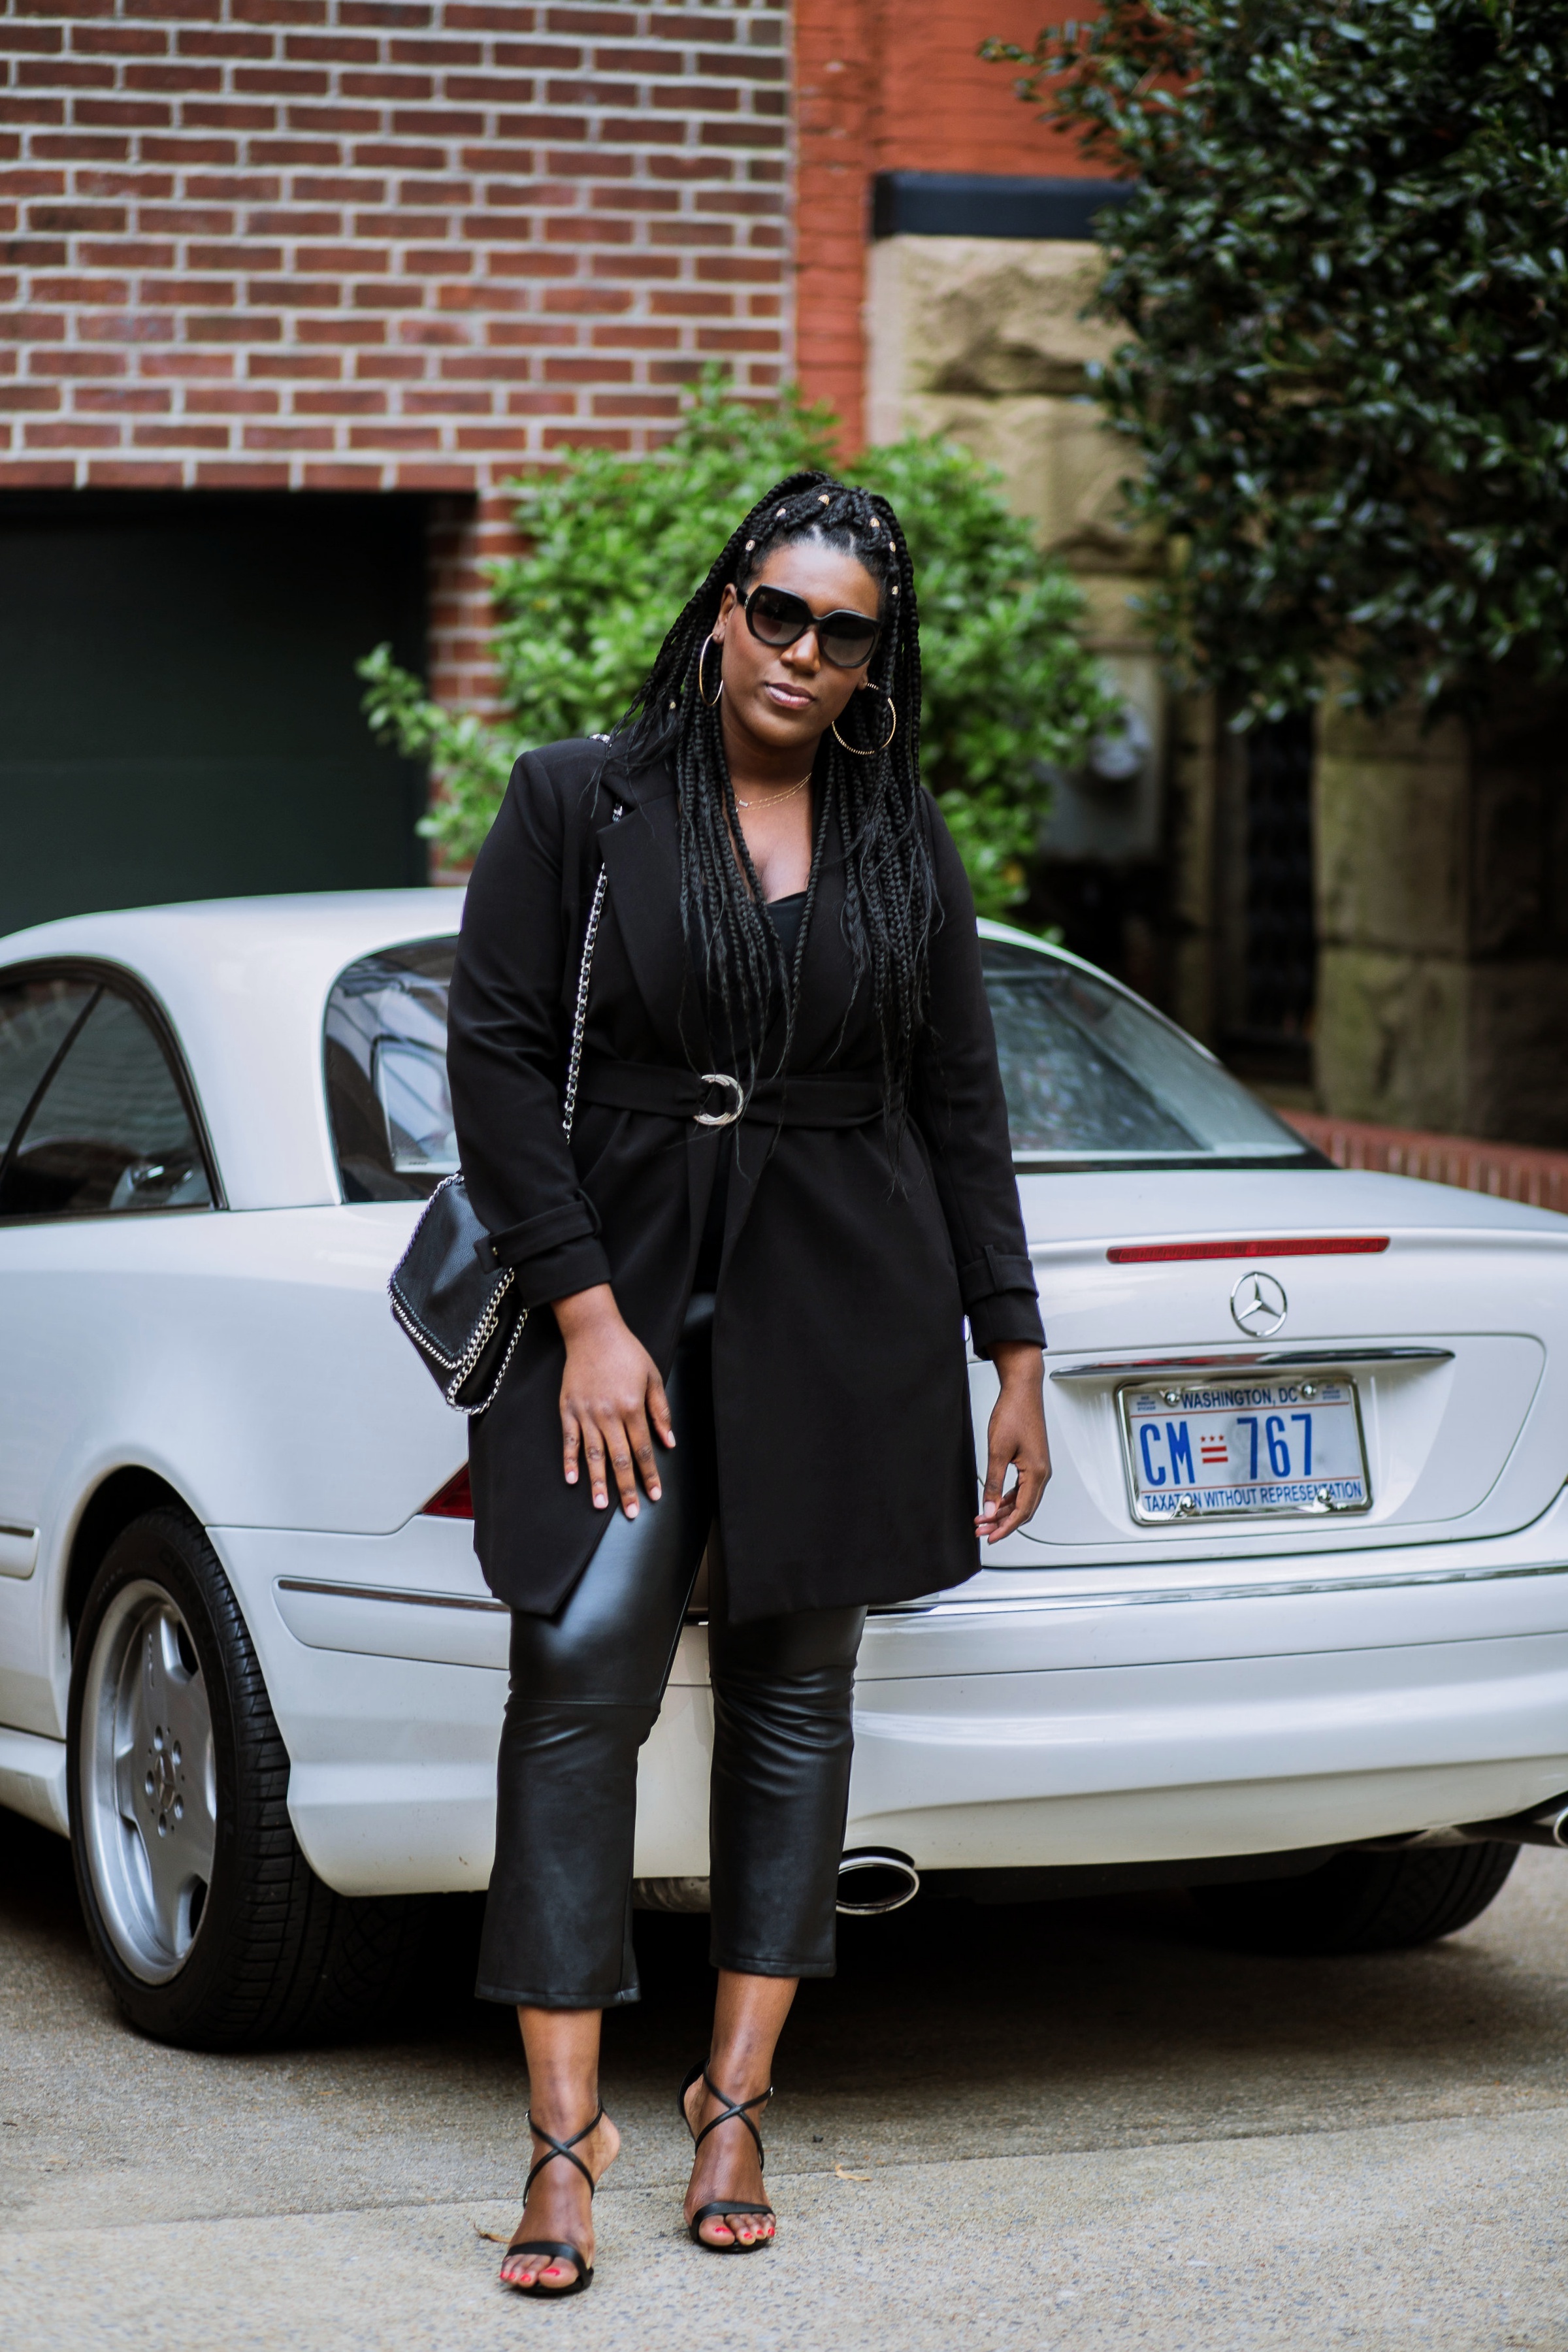 How To Look Effortlessly Chic — Plus Size Fashion Influencer